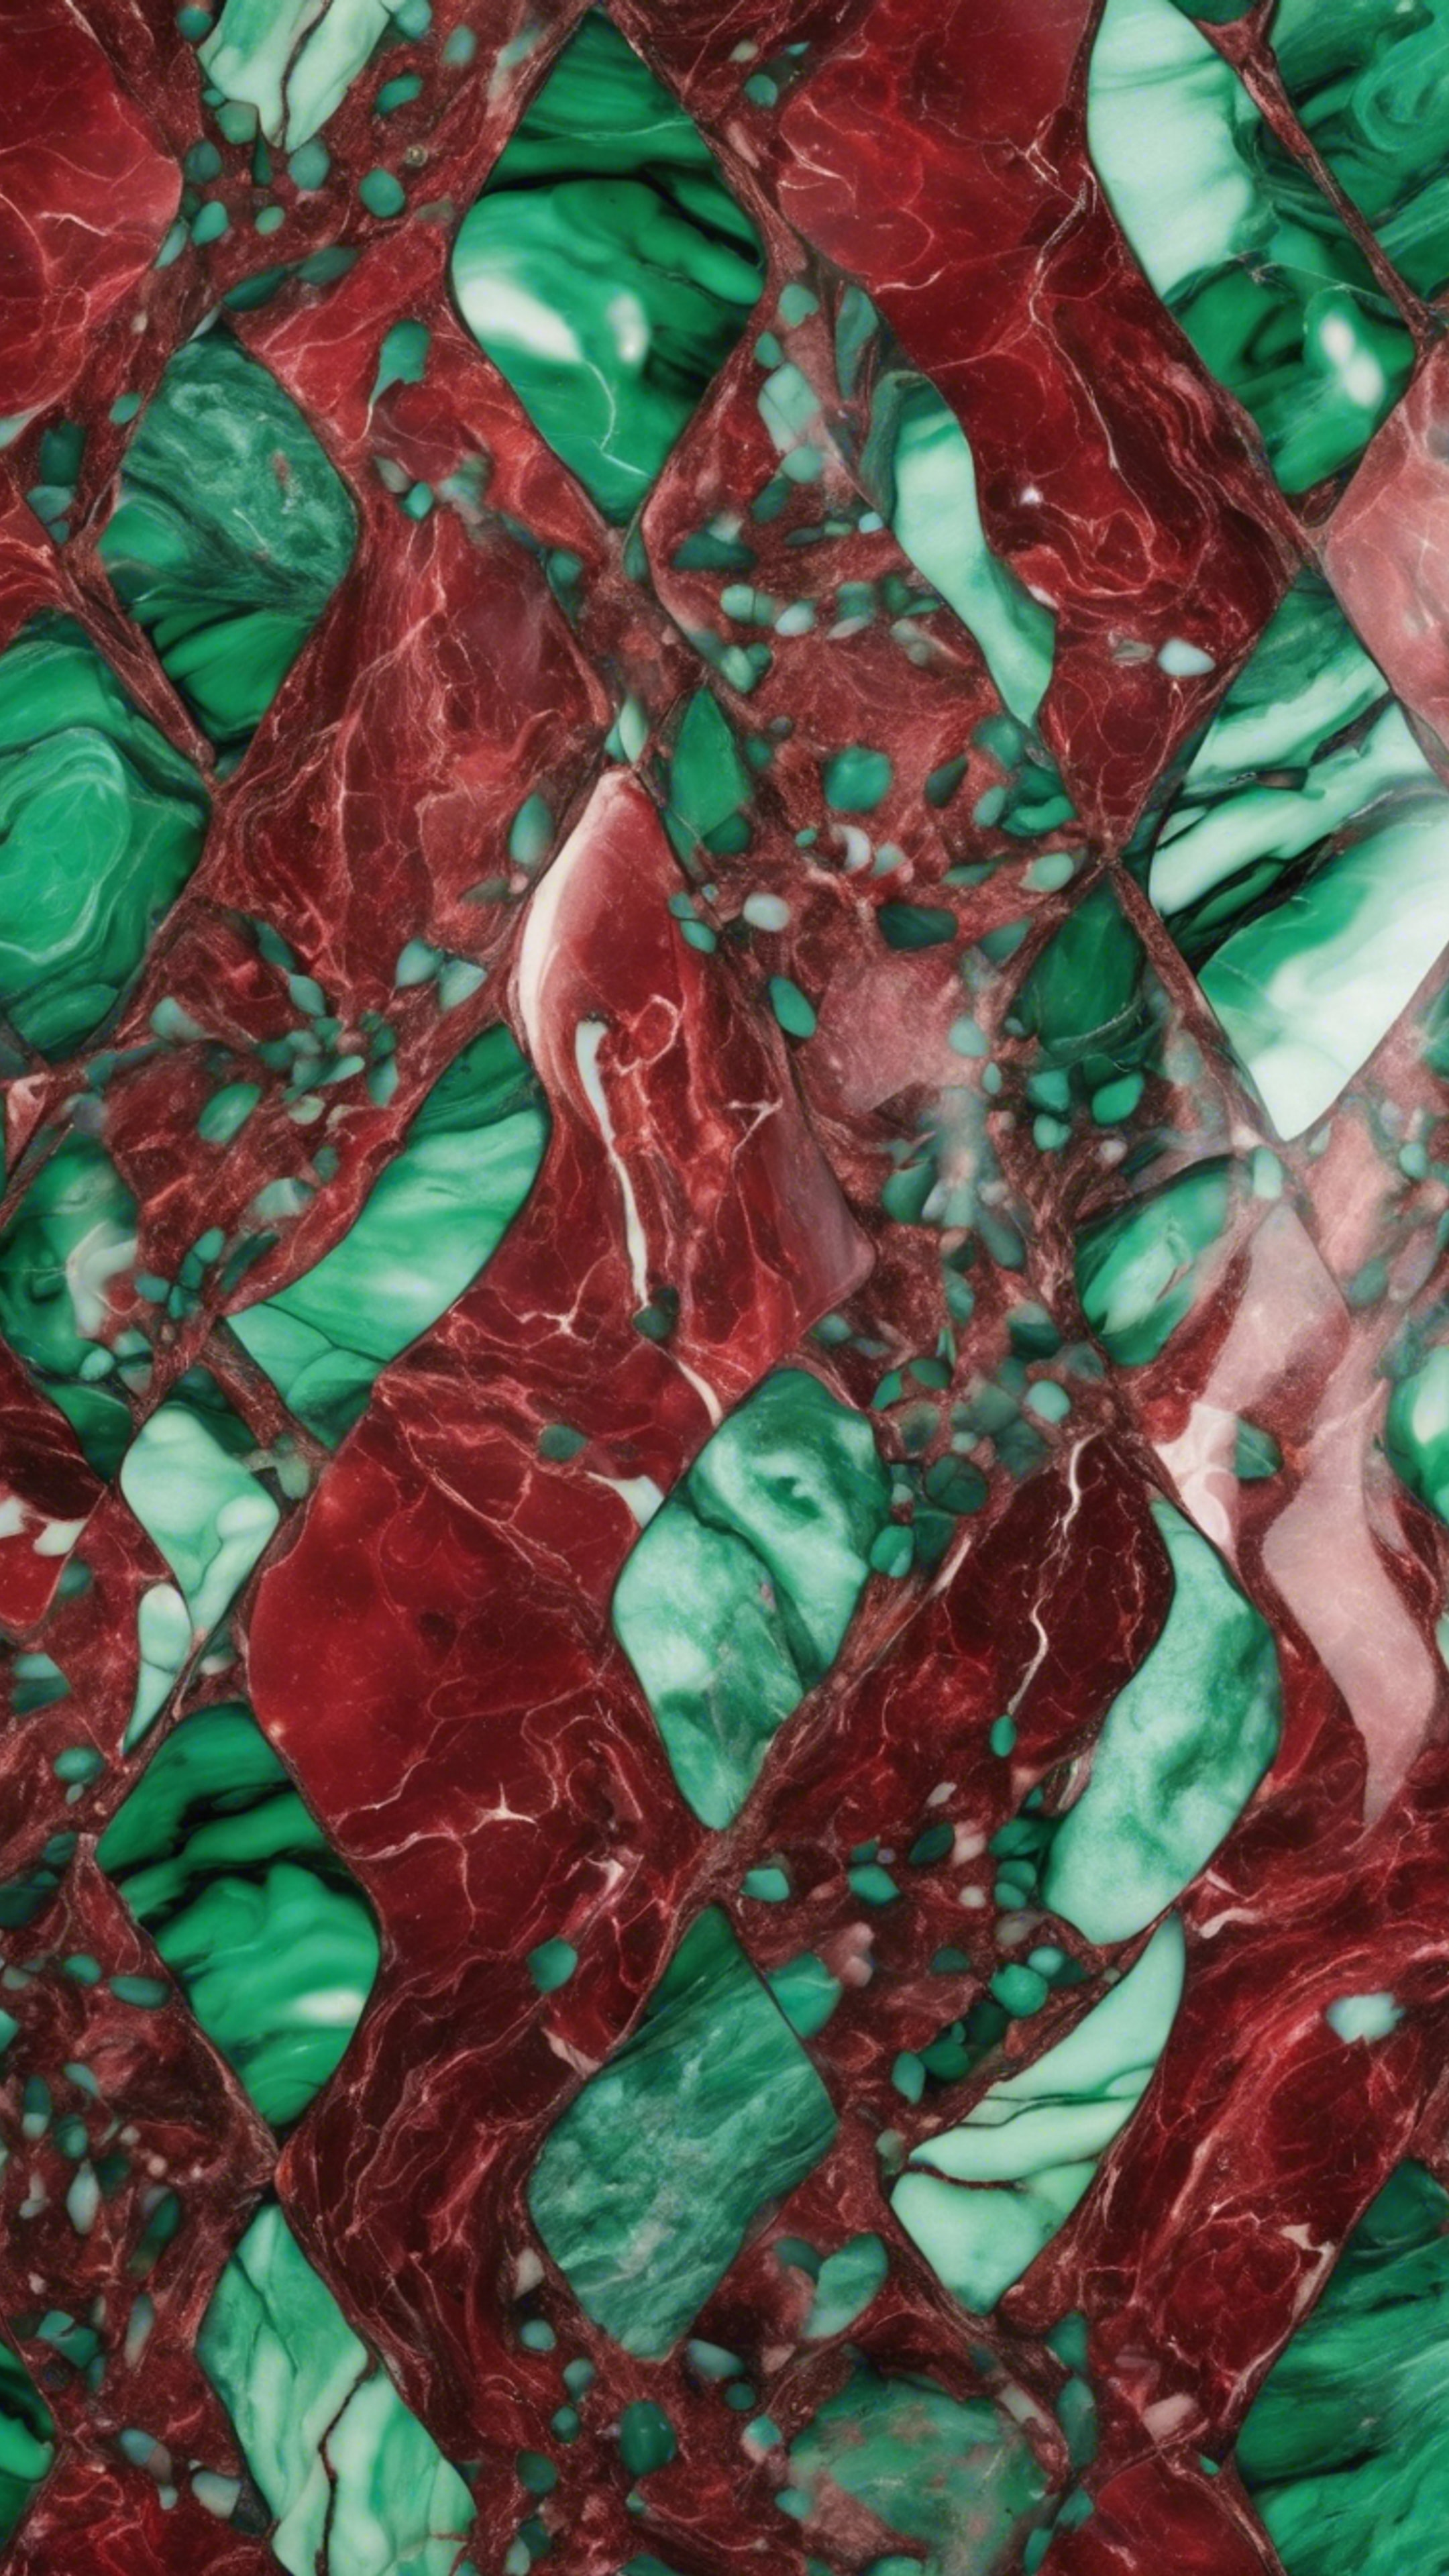 A flowing pattern of green and red marble reminiscent of Christmas colors. Tapeta[3422960c43fd4b3ba1cd]